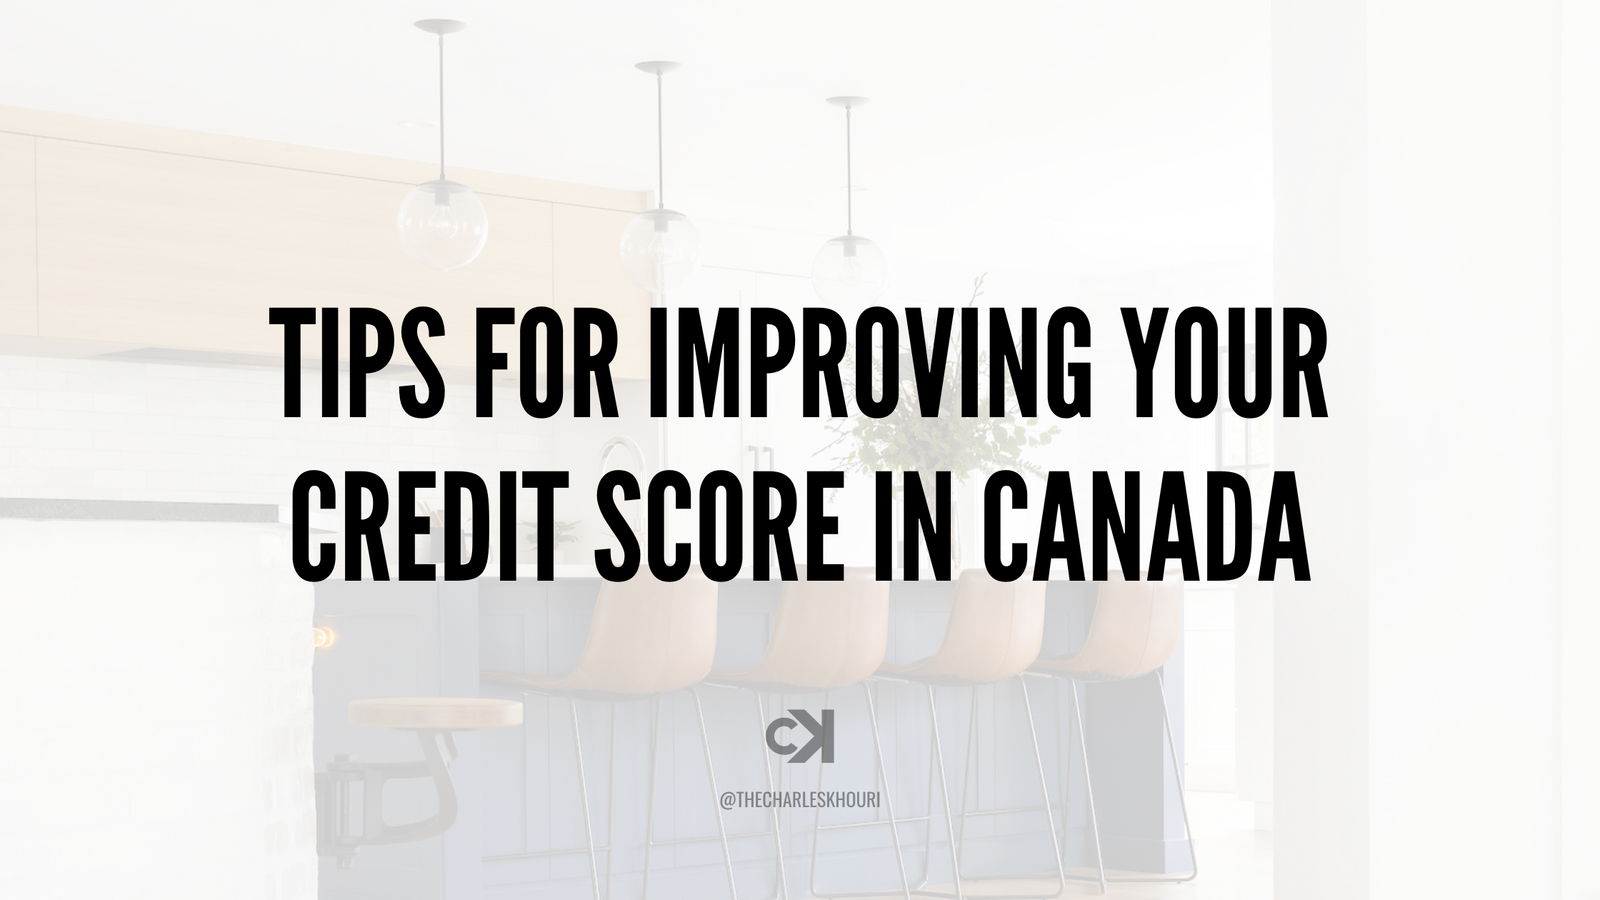 Don't Let Your Credit Score Crush Your Mortgage Dreams: Tips for Improving Your Credit Score in Canada